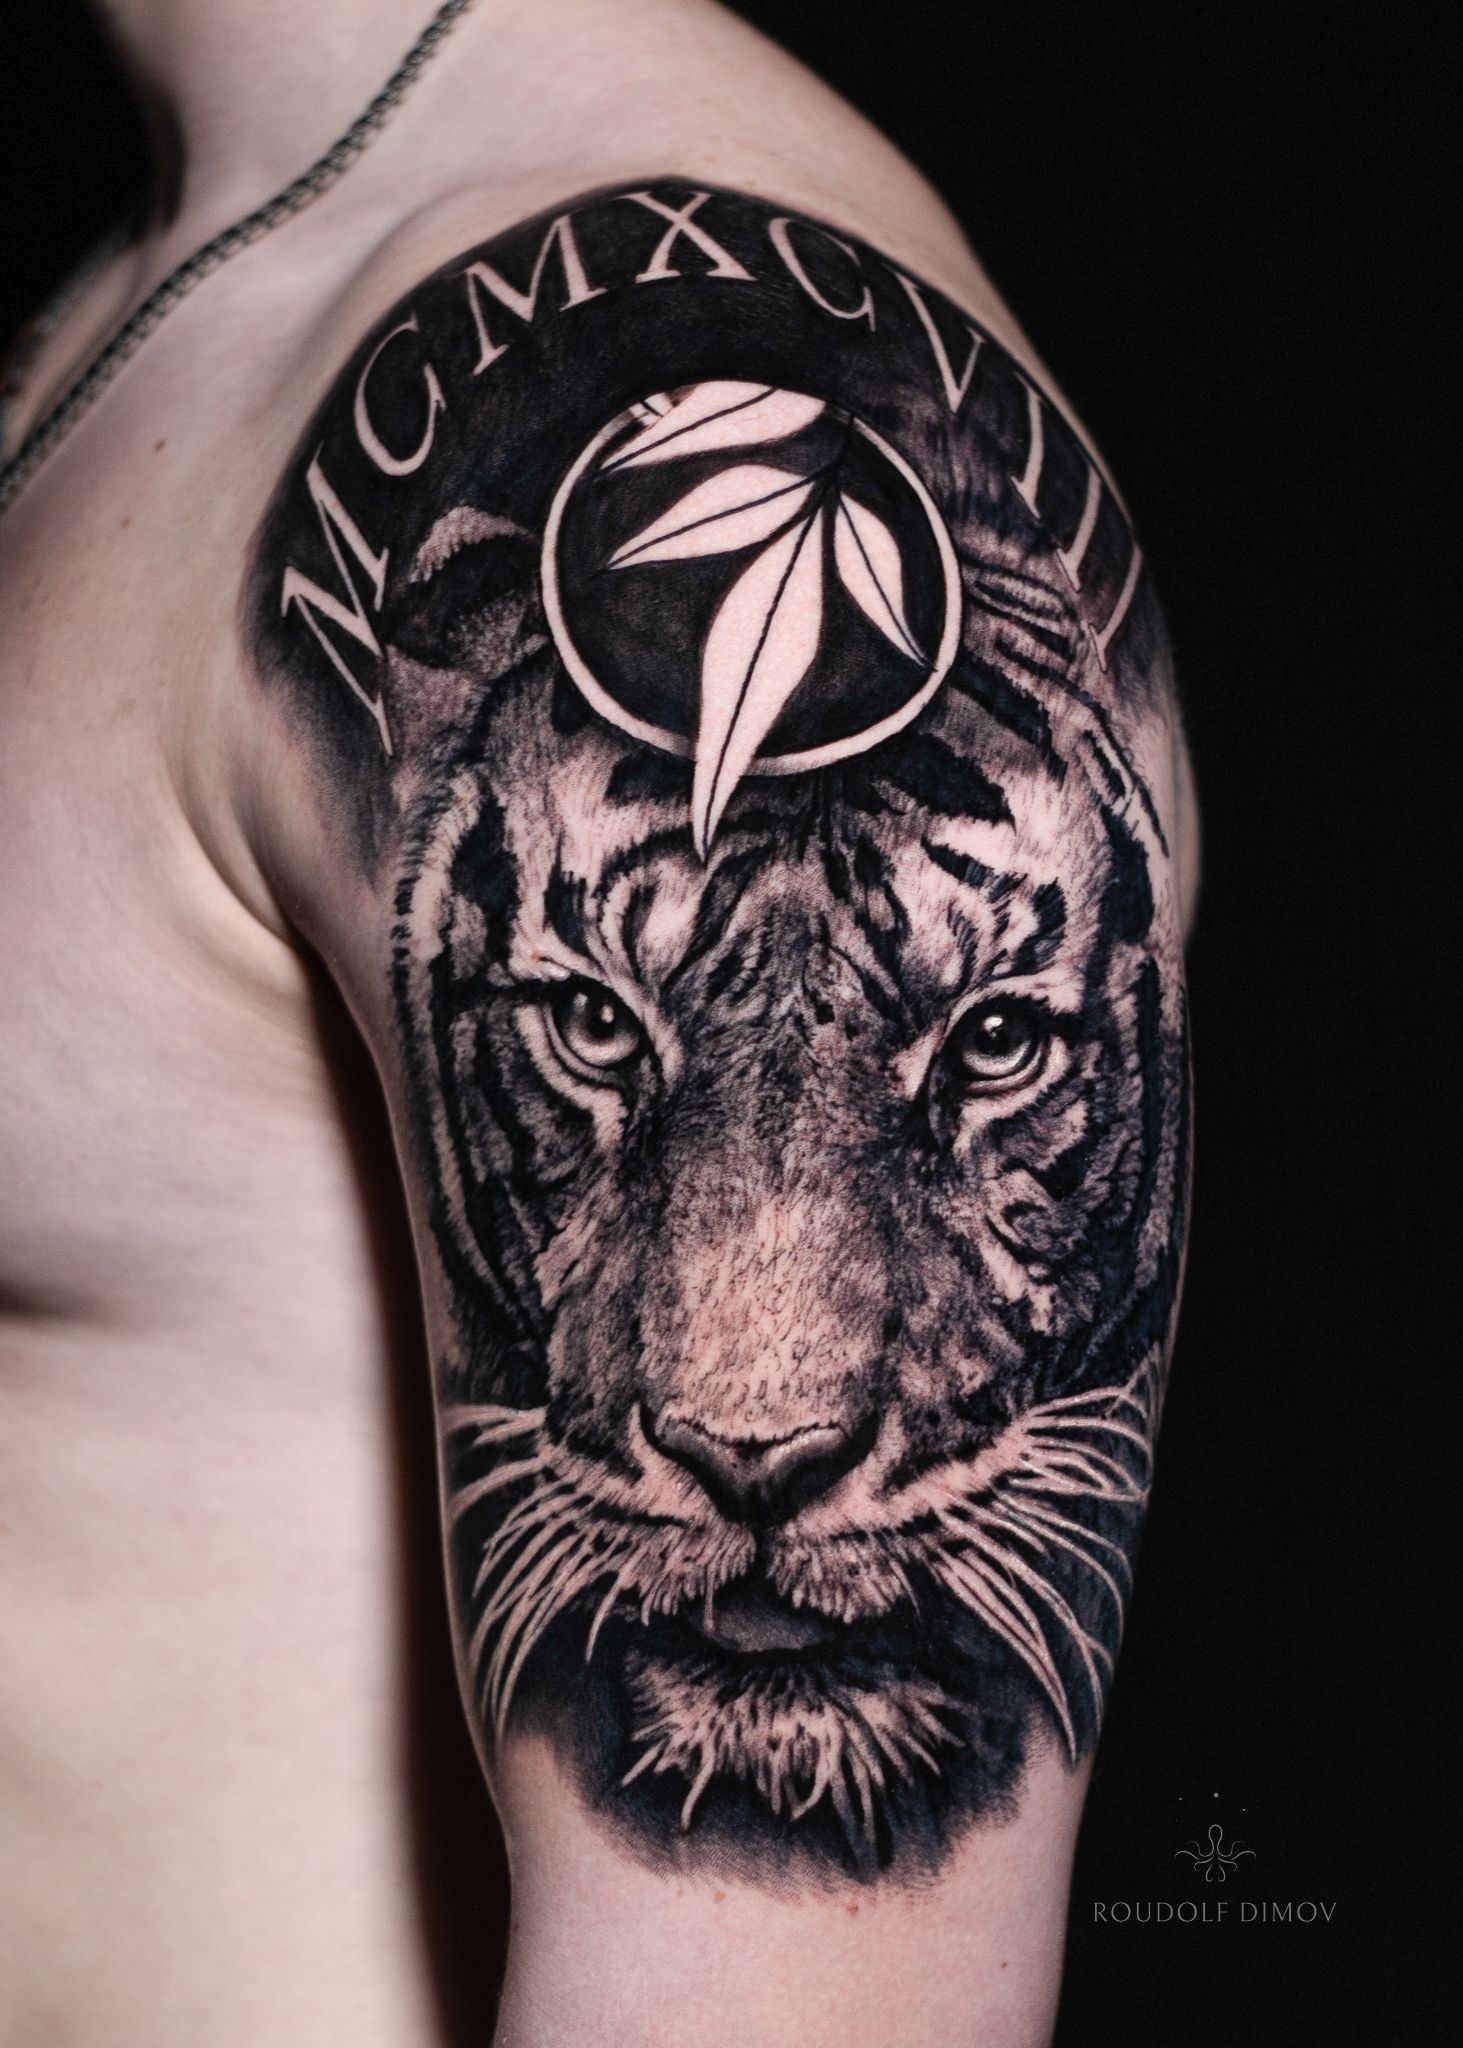 Tiger Tattoo Designs To Express Your Bravery - Cultura Colectiva